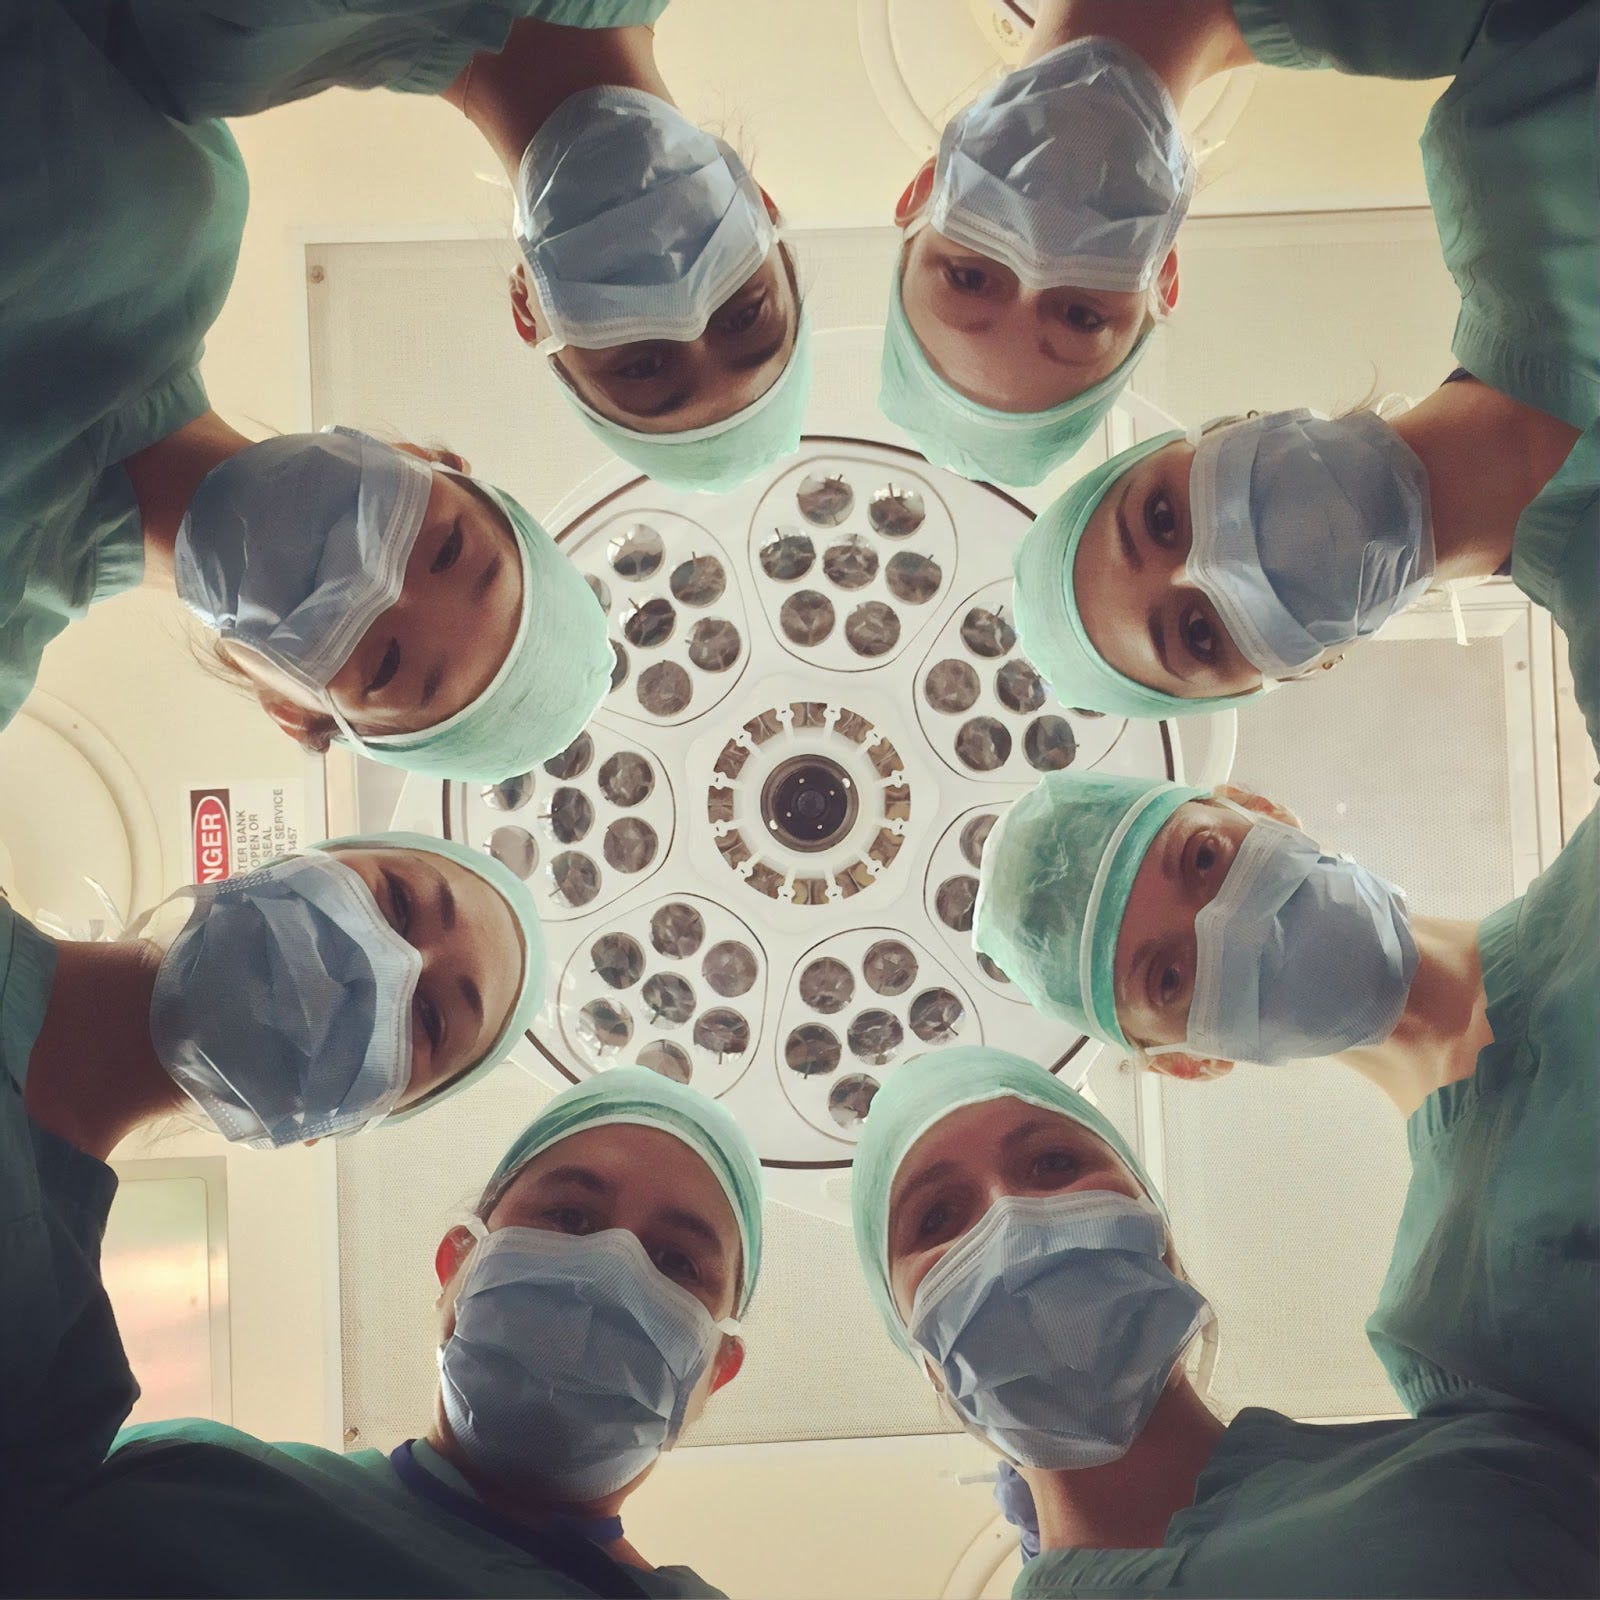 A photo of eight medical professionals wearing light green scrubs, matching caps, and blue surgical masks. Most of their faces are hidden under the masks, with only their eyes visible. They are standing in a circle and looking down at the camera, which takes the position of a patient lying on a hospital bed. Above the doctor’s head is a set of lights and the ceiling, both of which indicate that the room is a surgical theater.